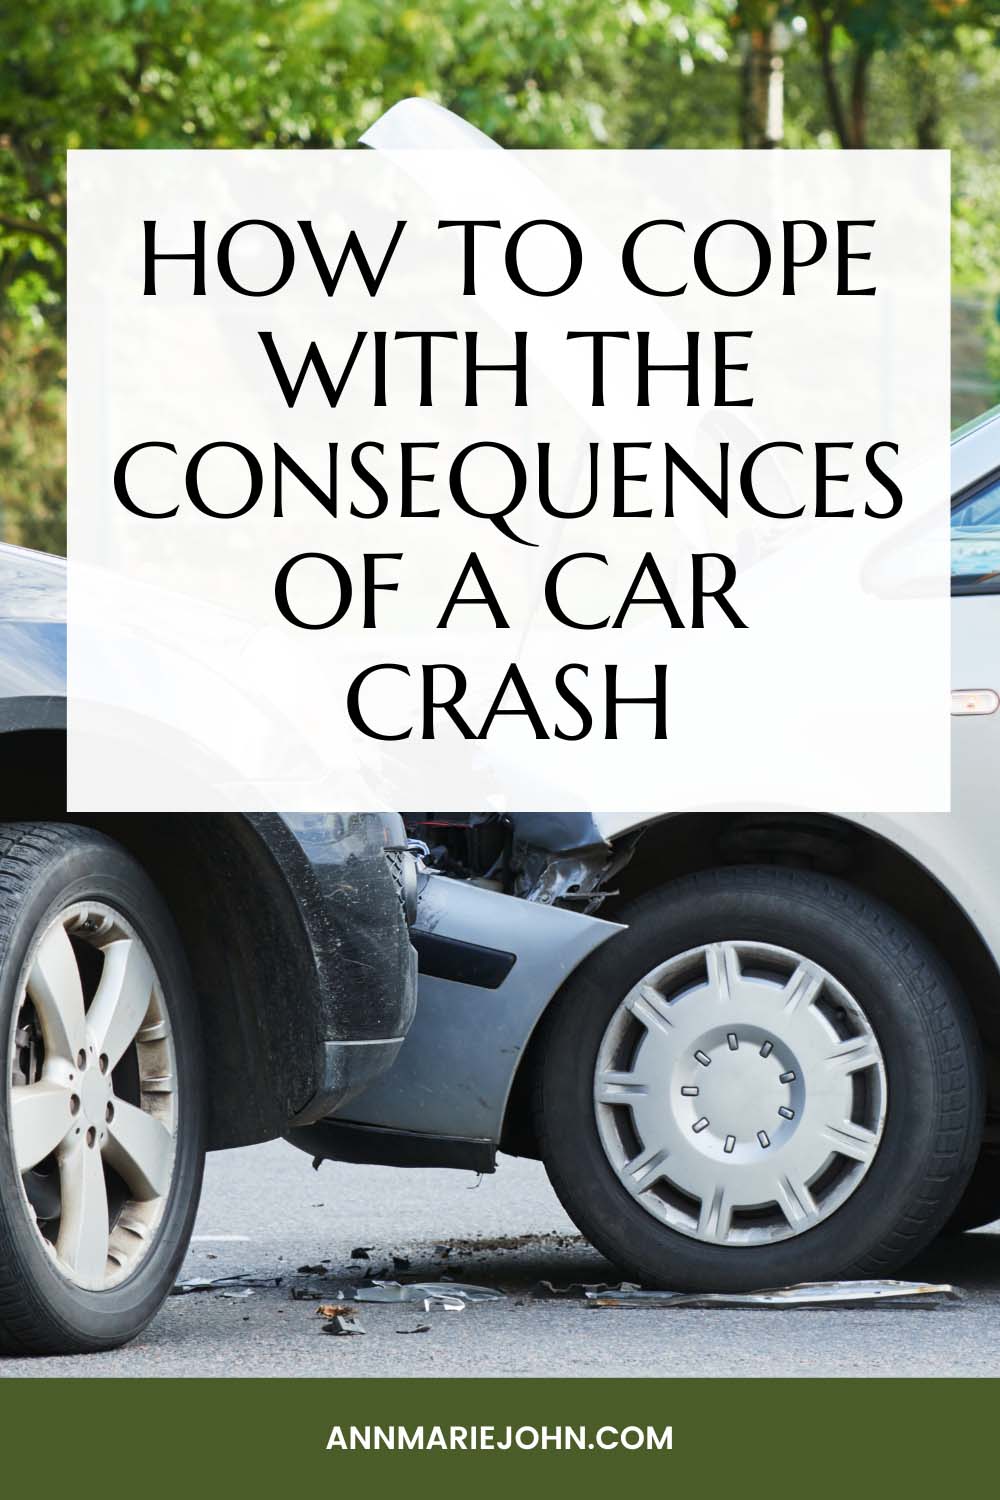 How to Cope with the Consequences of a Car Crash